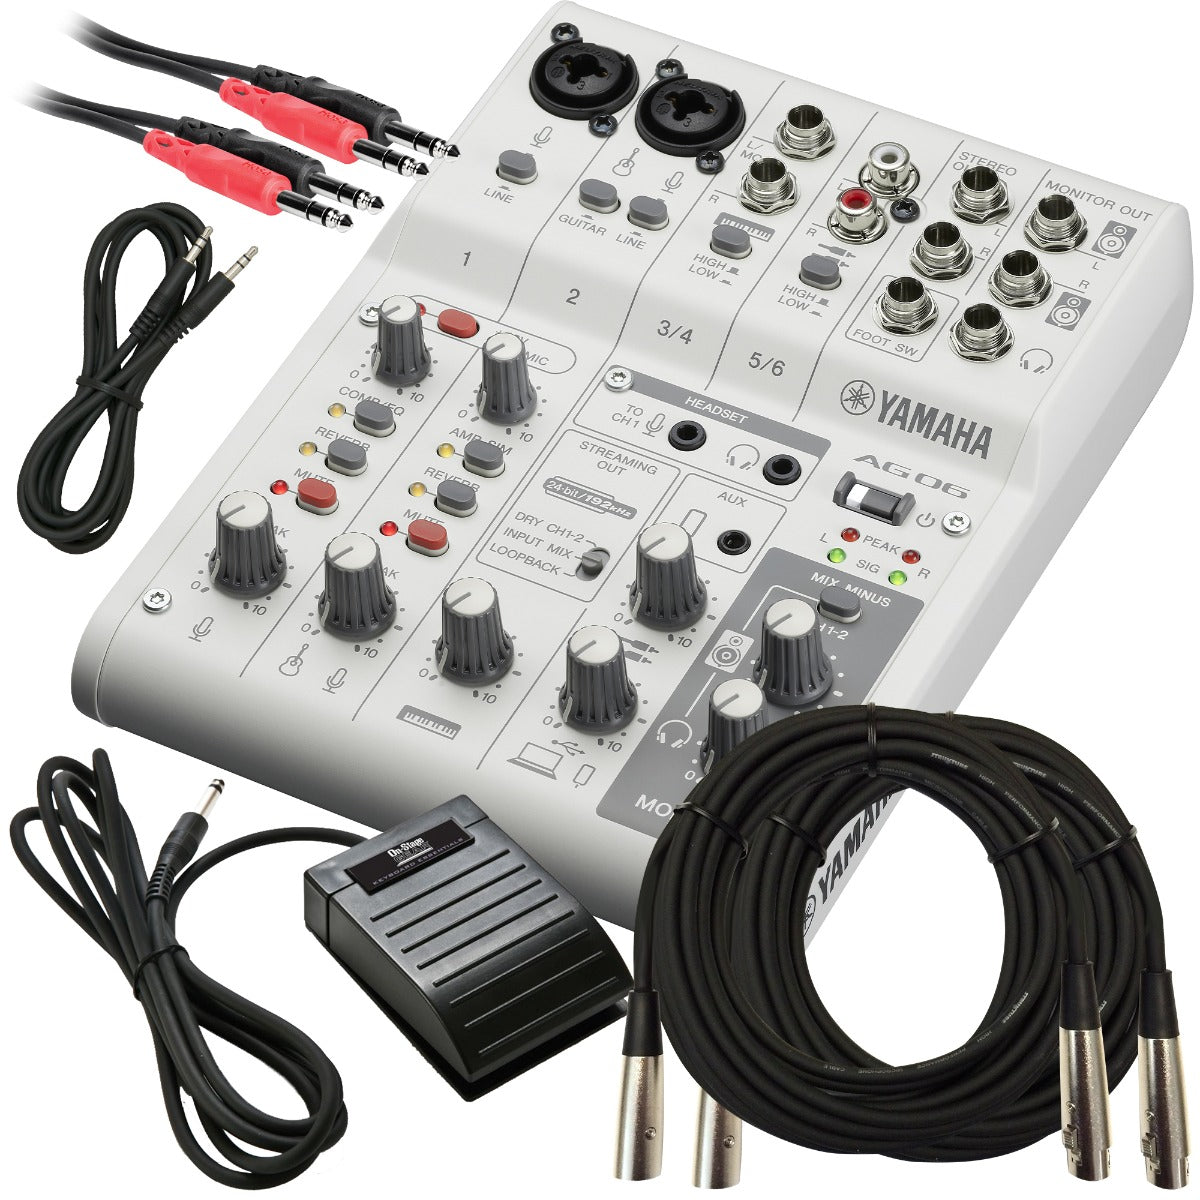 Yamaha AG Mk2 Live Streaming Mixer and USB Audio Interface   White CABLE  KIT